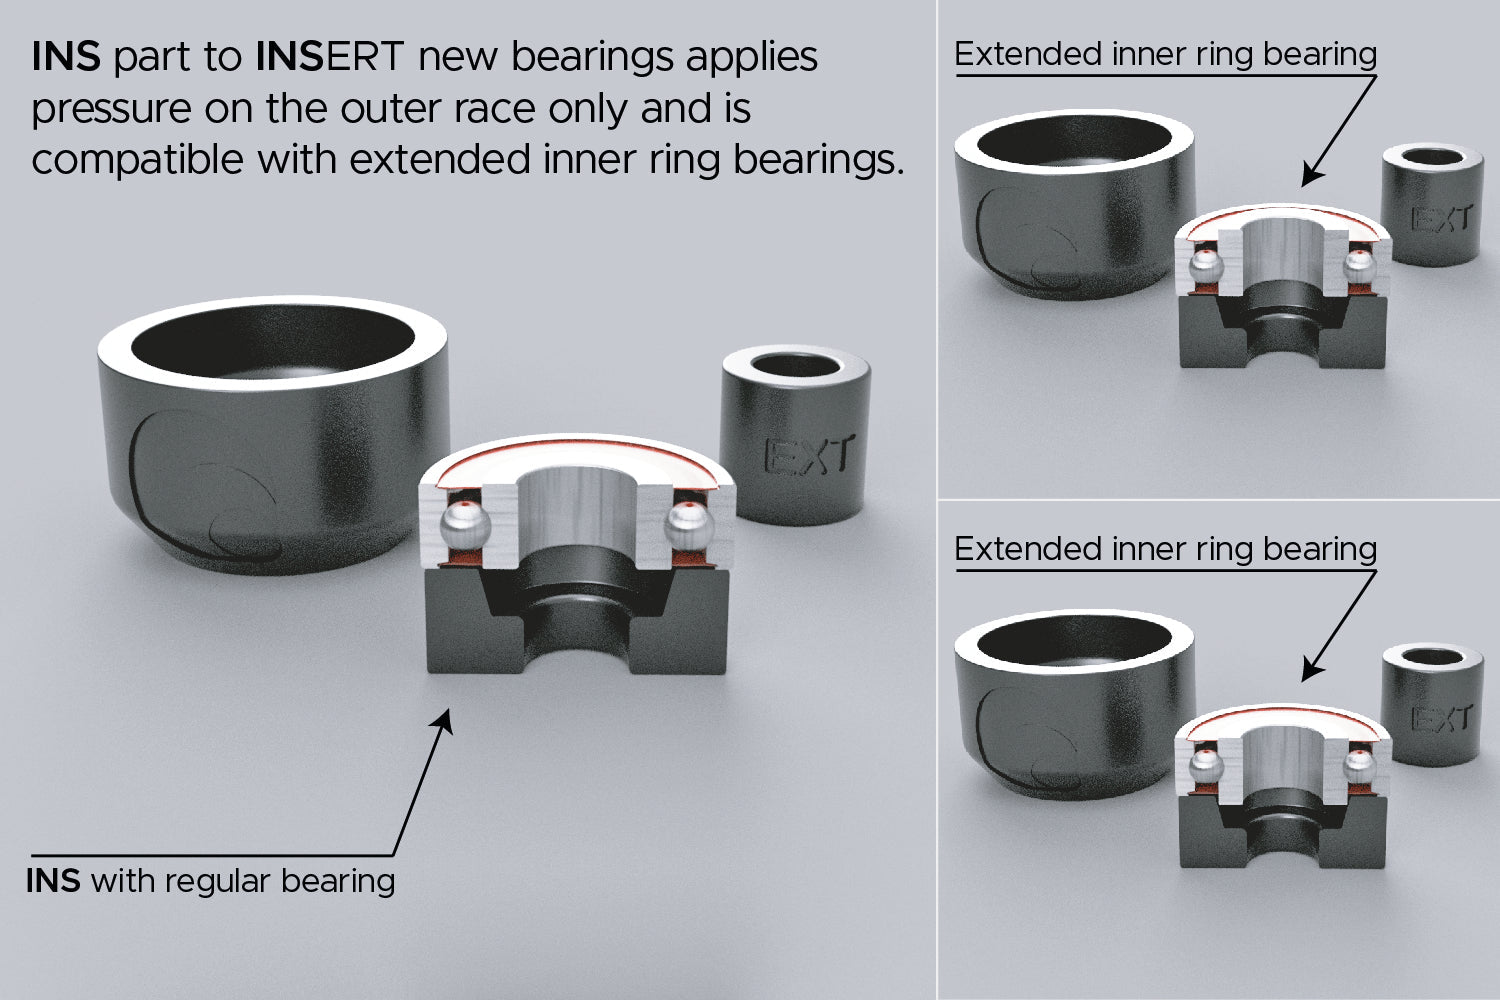 Our Bearing Press Tools and Kits are compatible with extended inner ring bearings.